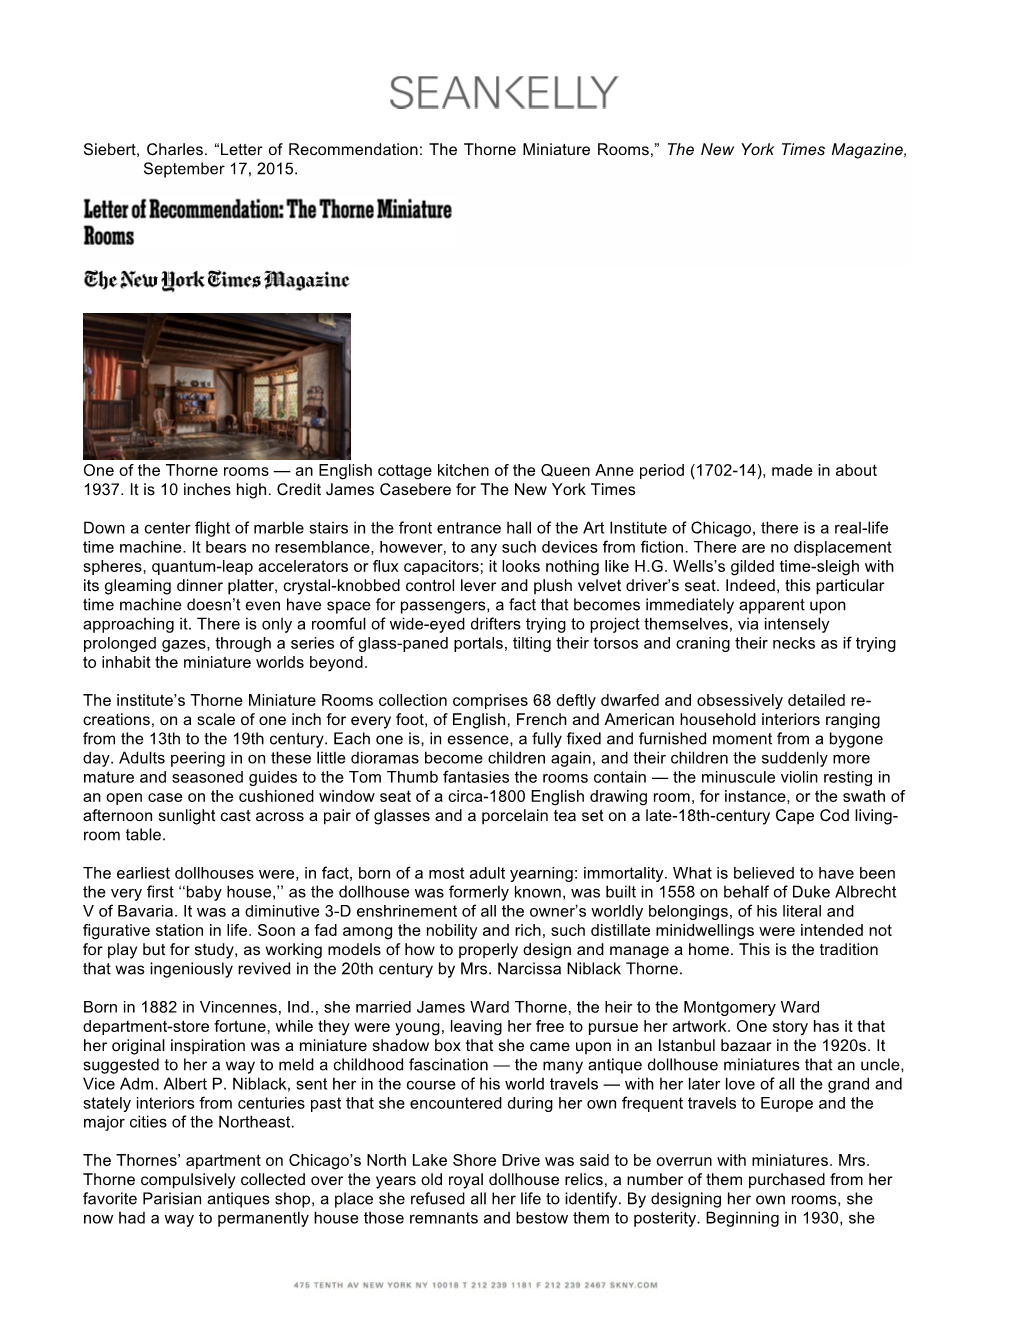 “Letter of Recommendation: the Thorne Miniature Rooms,” the New York Times Magazine, September 17, 2015